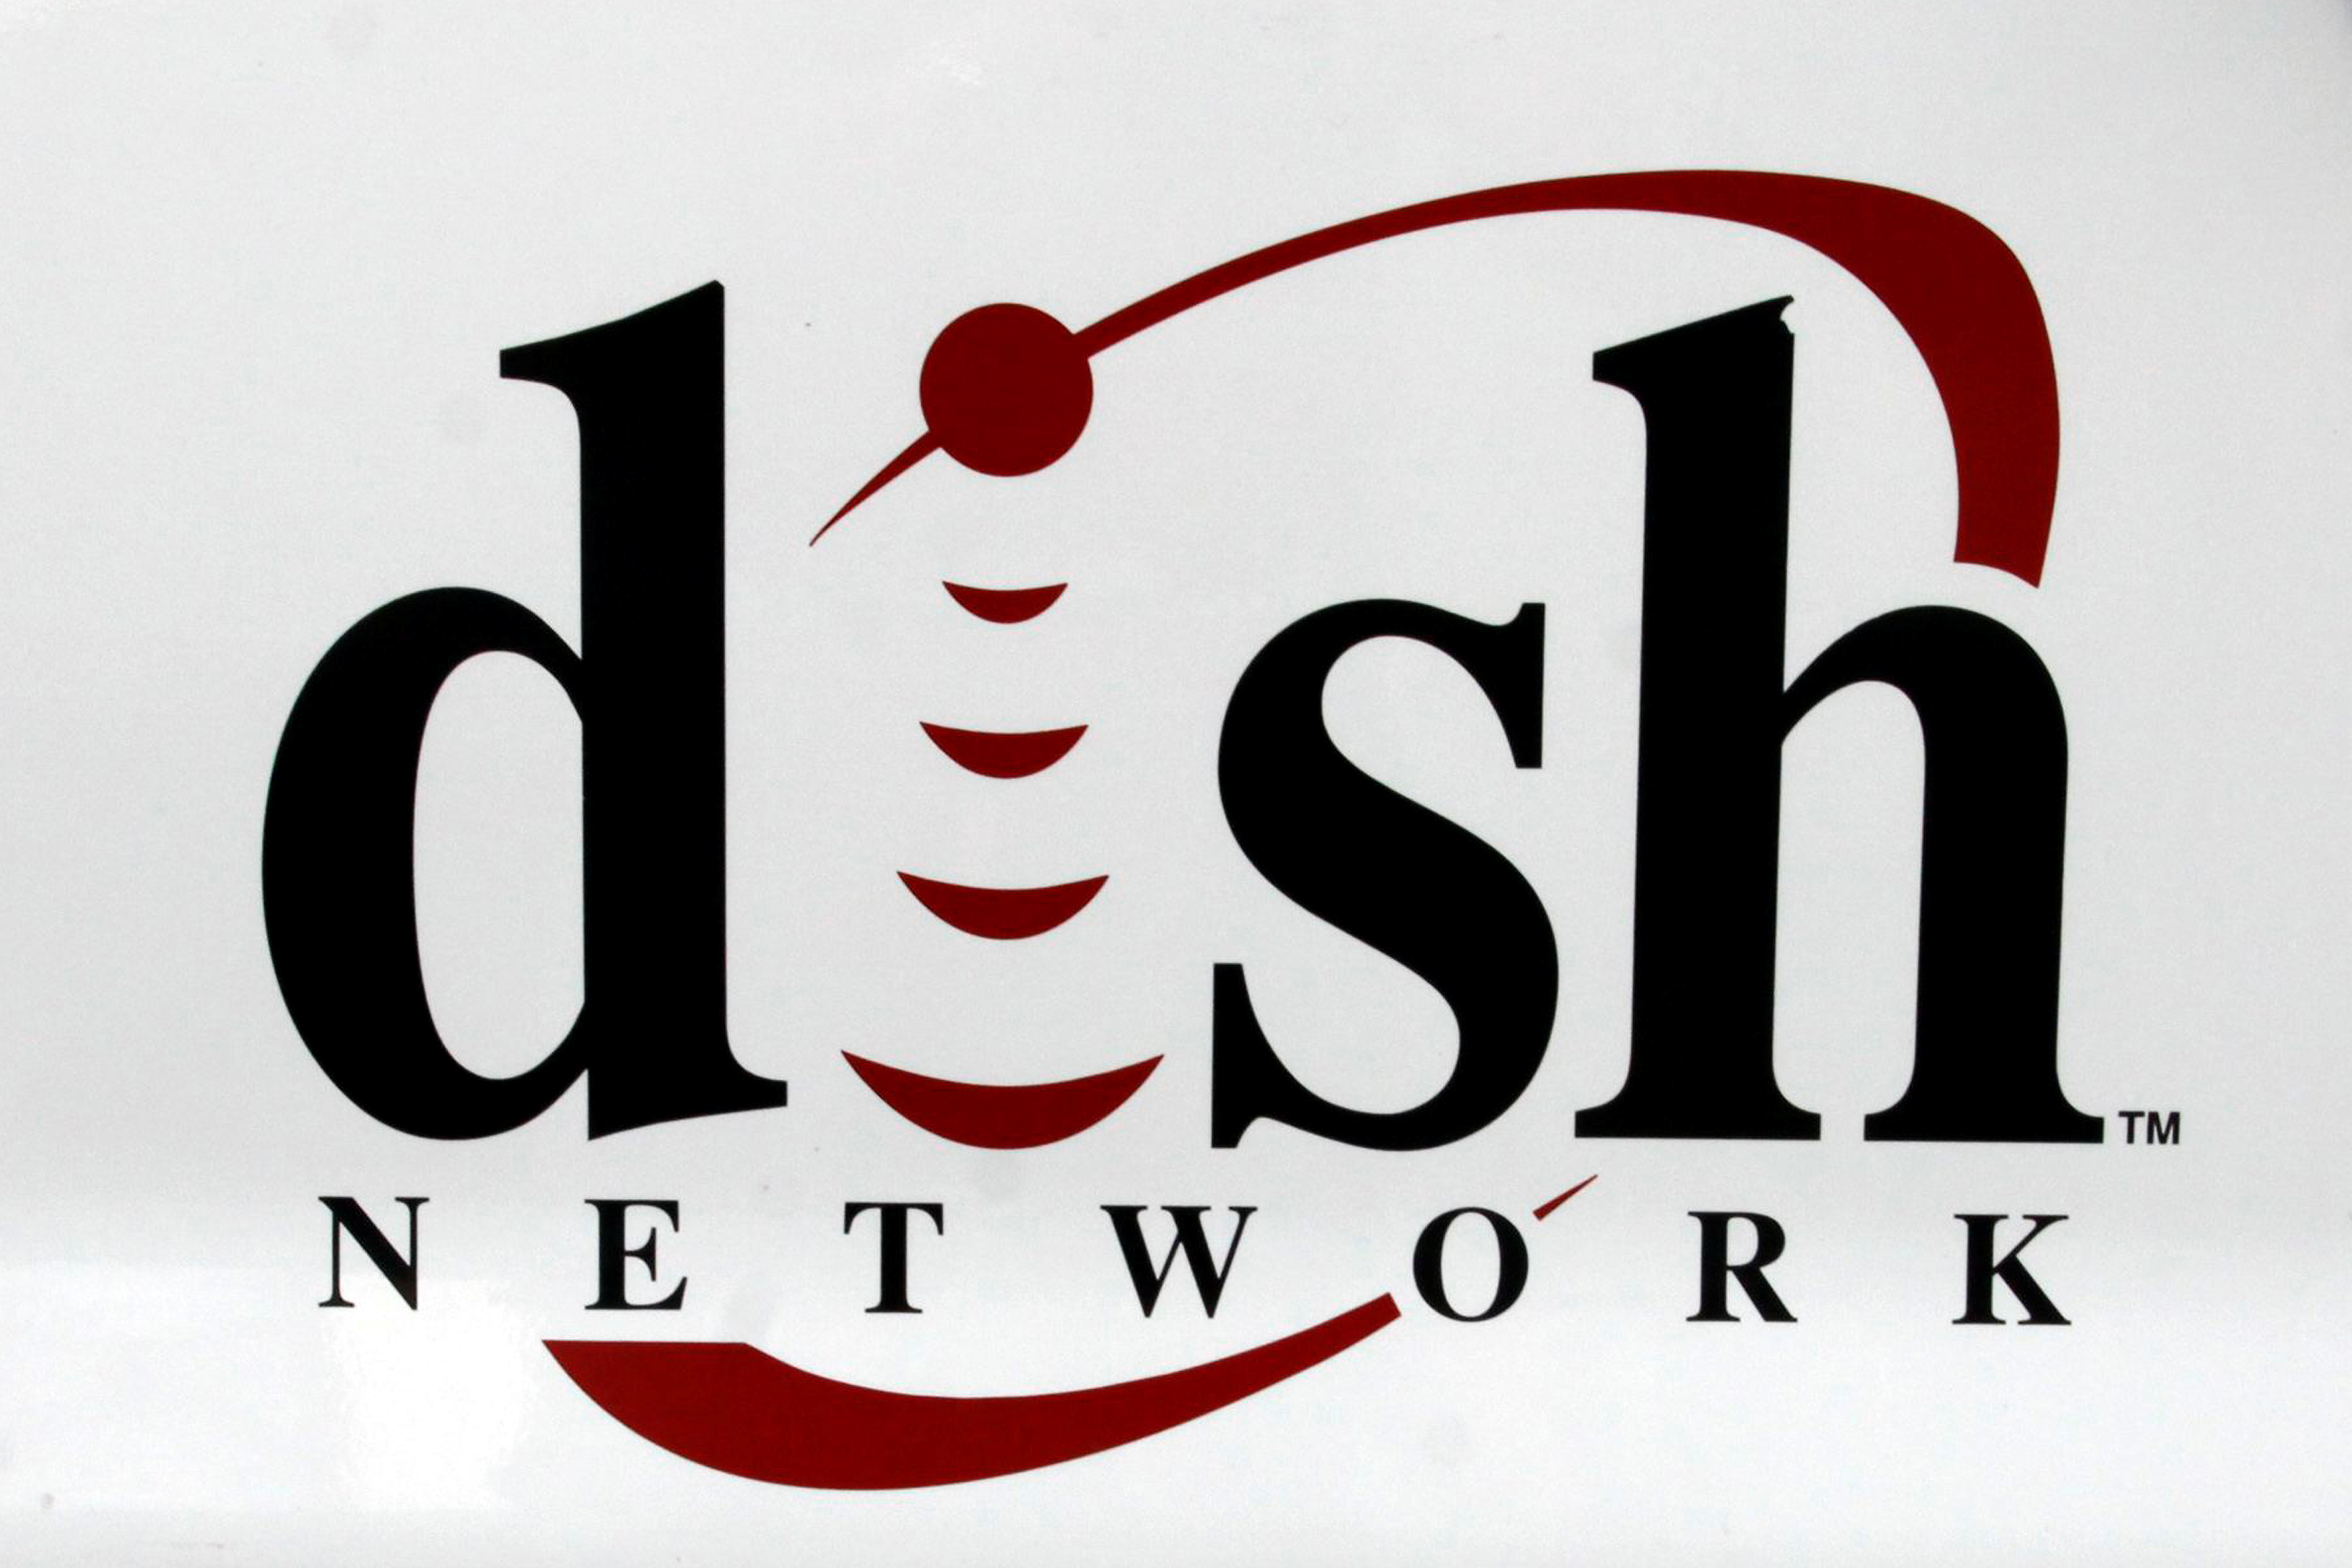 The Dish Network logo is seen on the side of an installer truck in Denver, Colorado March 2, 2009. REUTERS/Rick Wilking